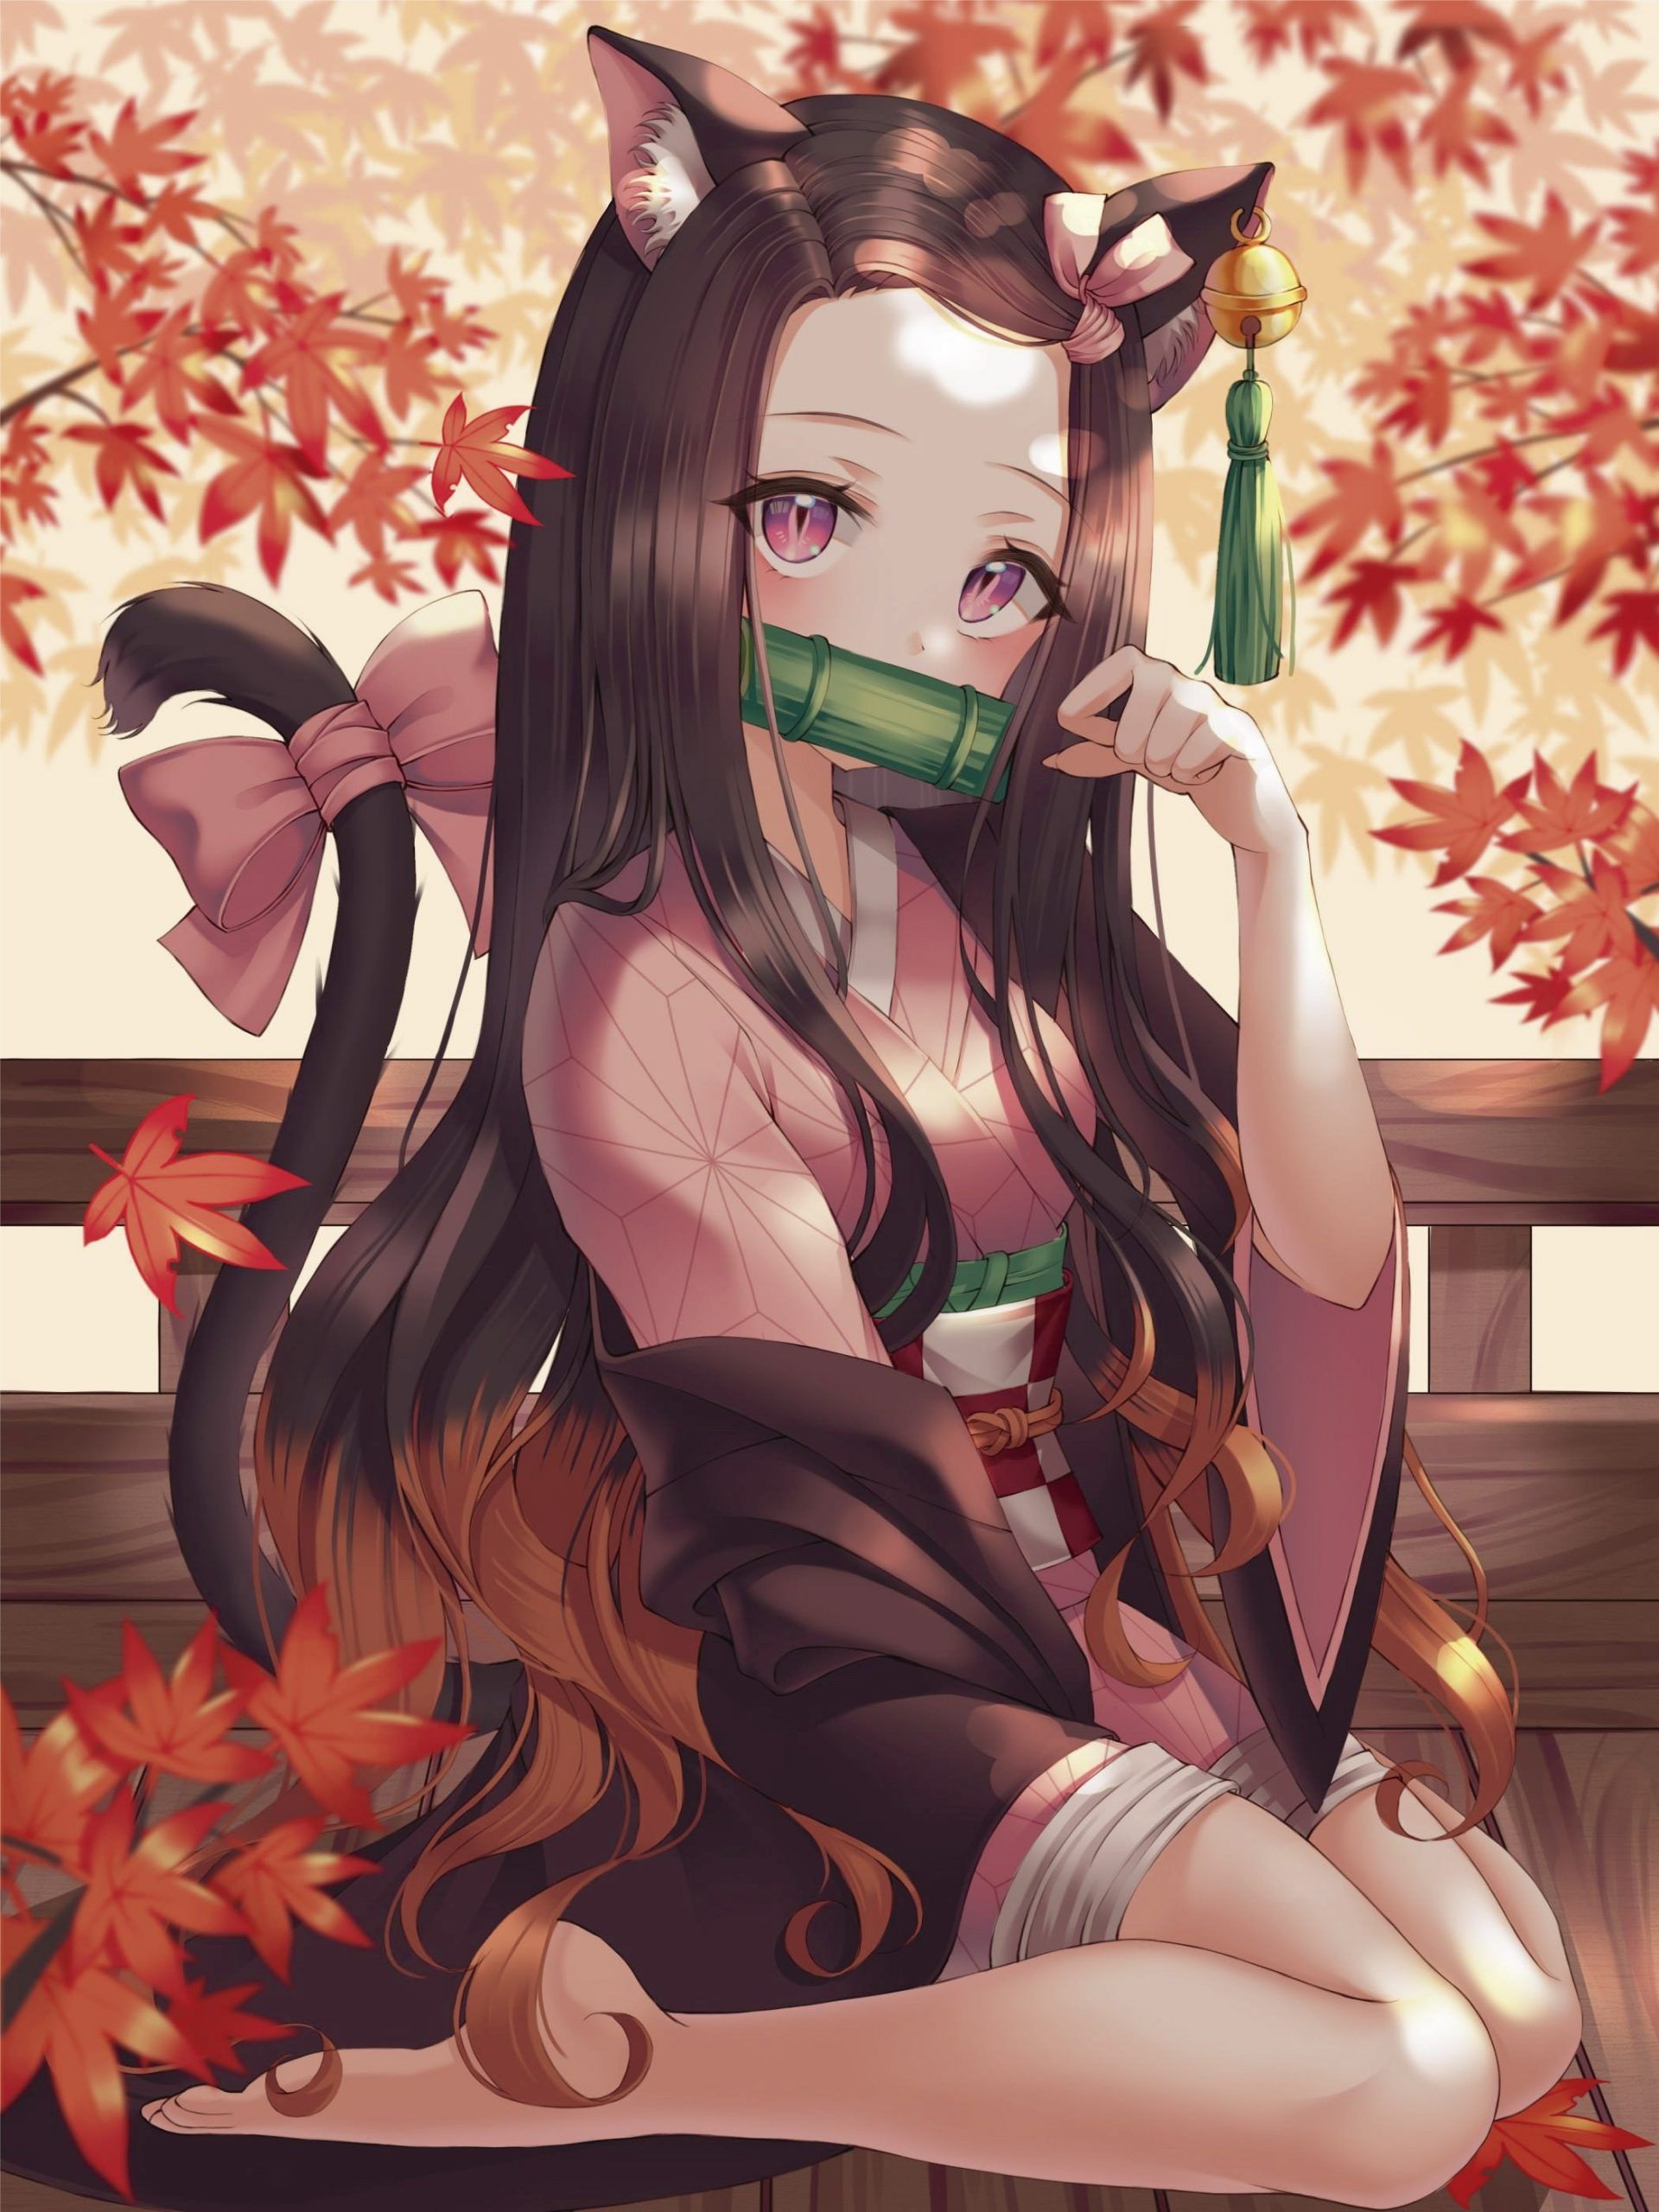 Anime girl with long brown hair and cat ears sitting on a bench - Nezuko